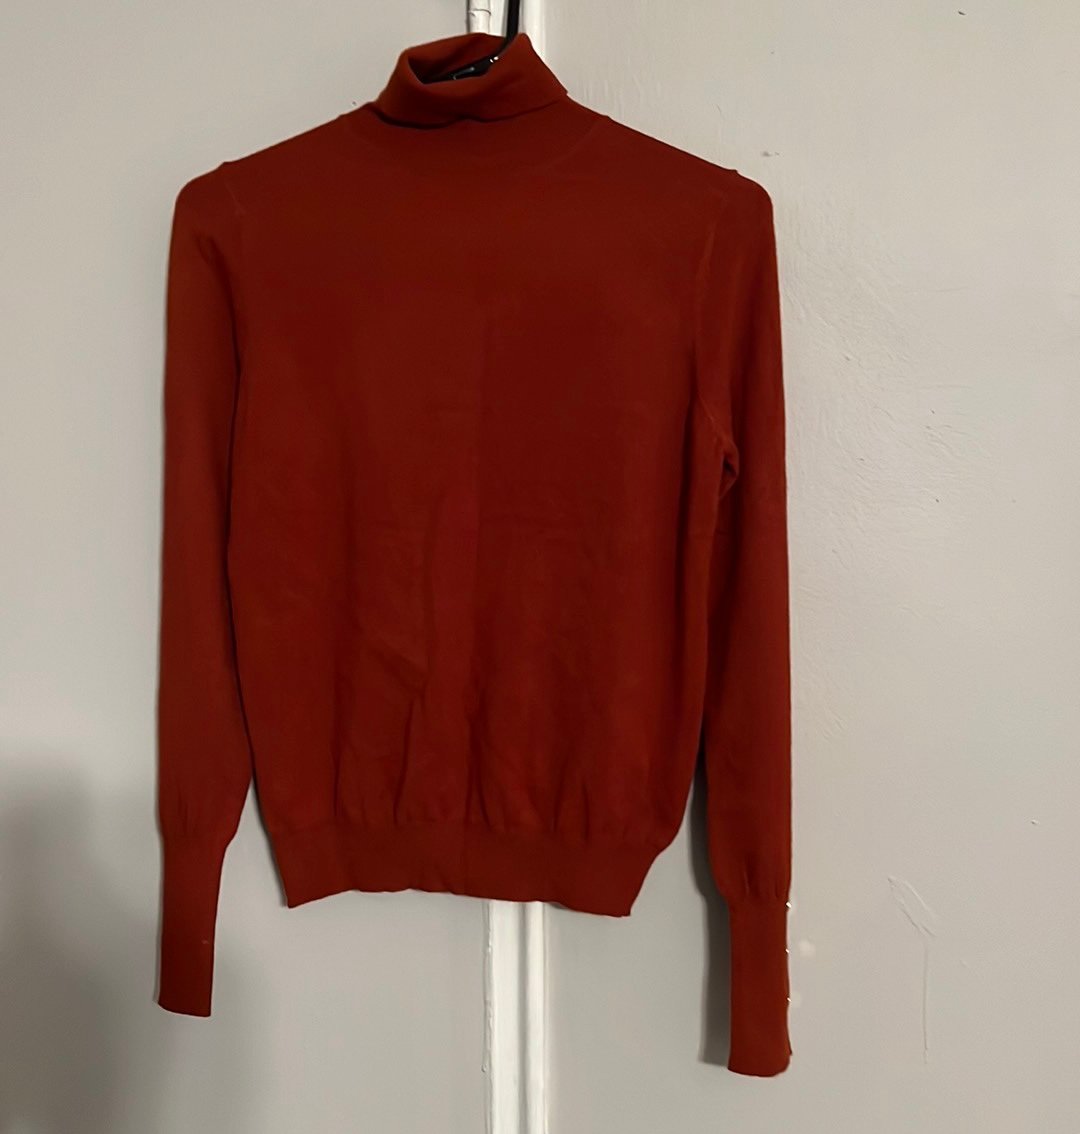 floor price NWT Rust color Turtleneck g4J3rom31 Outlet Store